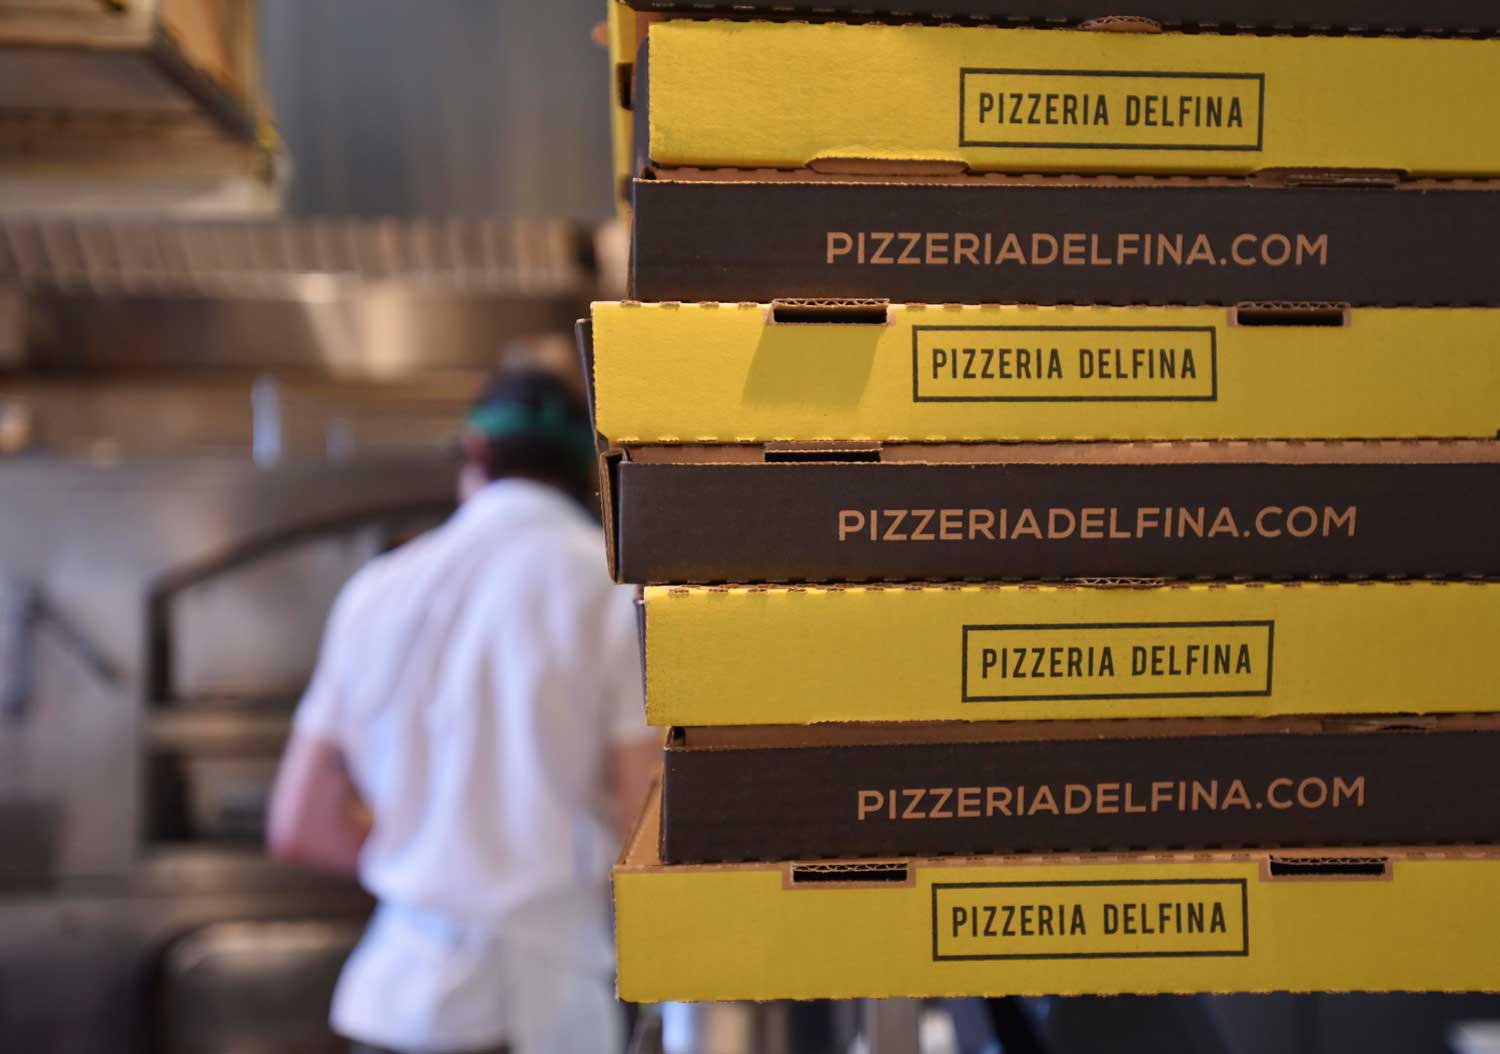 Pizzeria Delfina works with delivery services like Postmates to make it easy to order their pizza for delivery